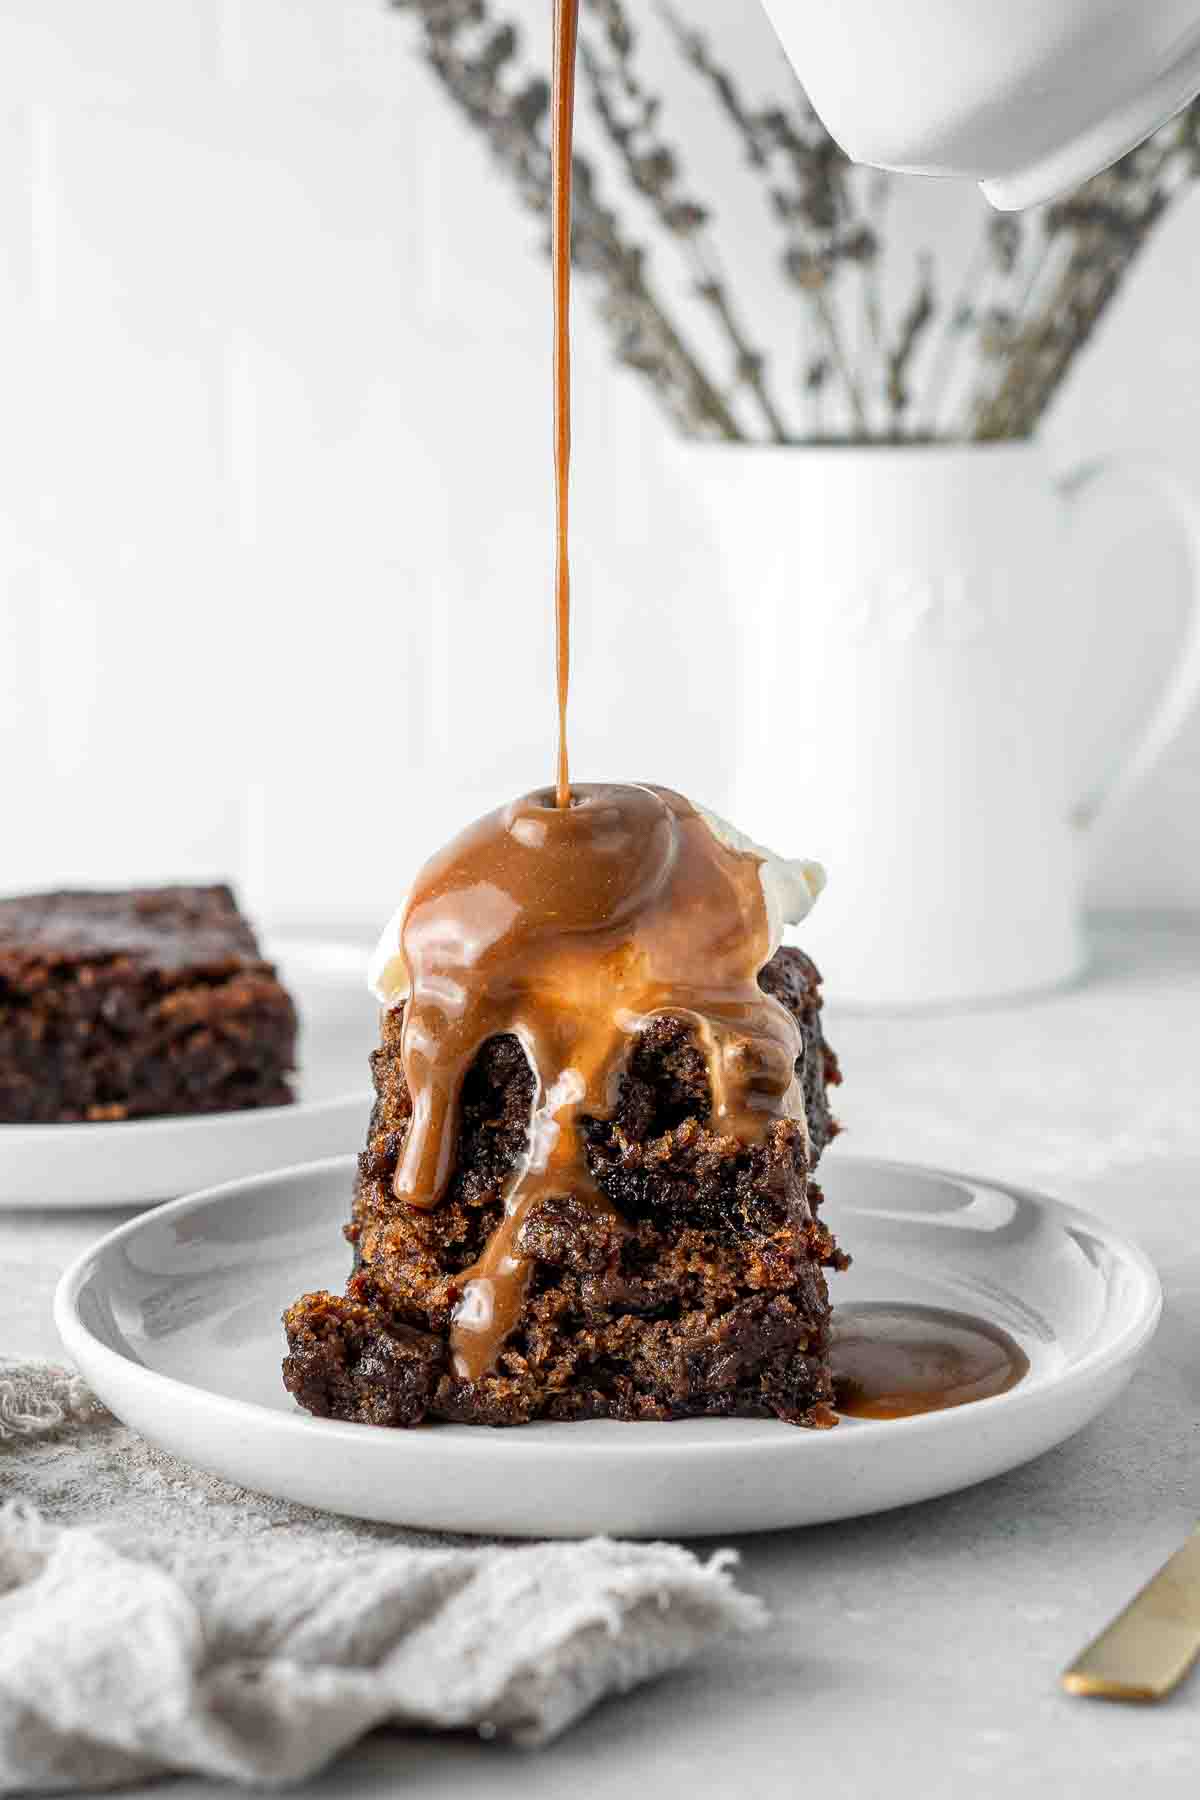 Drizzling caramel sauce over vegan sticky date pudding.